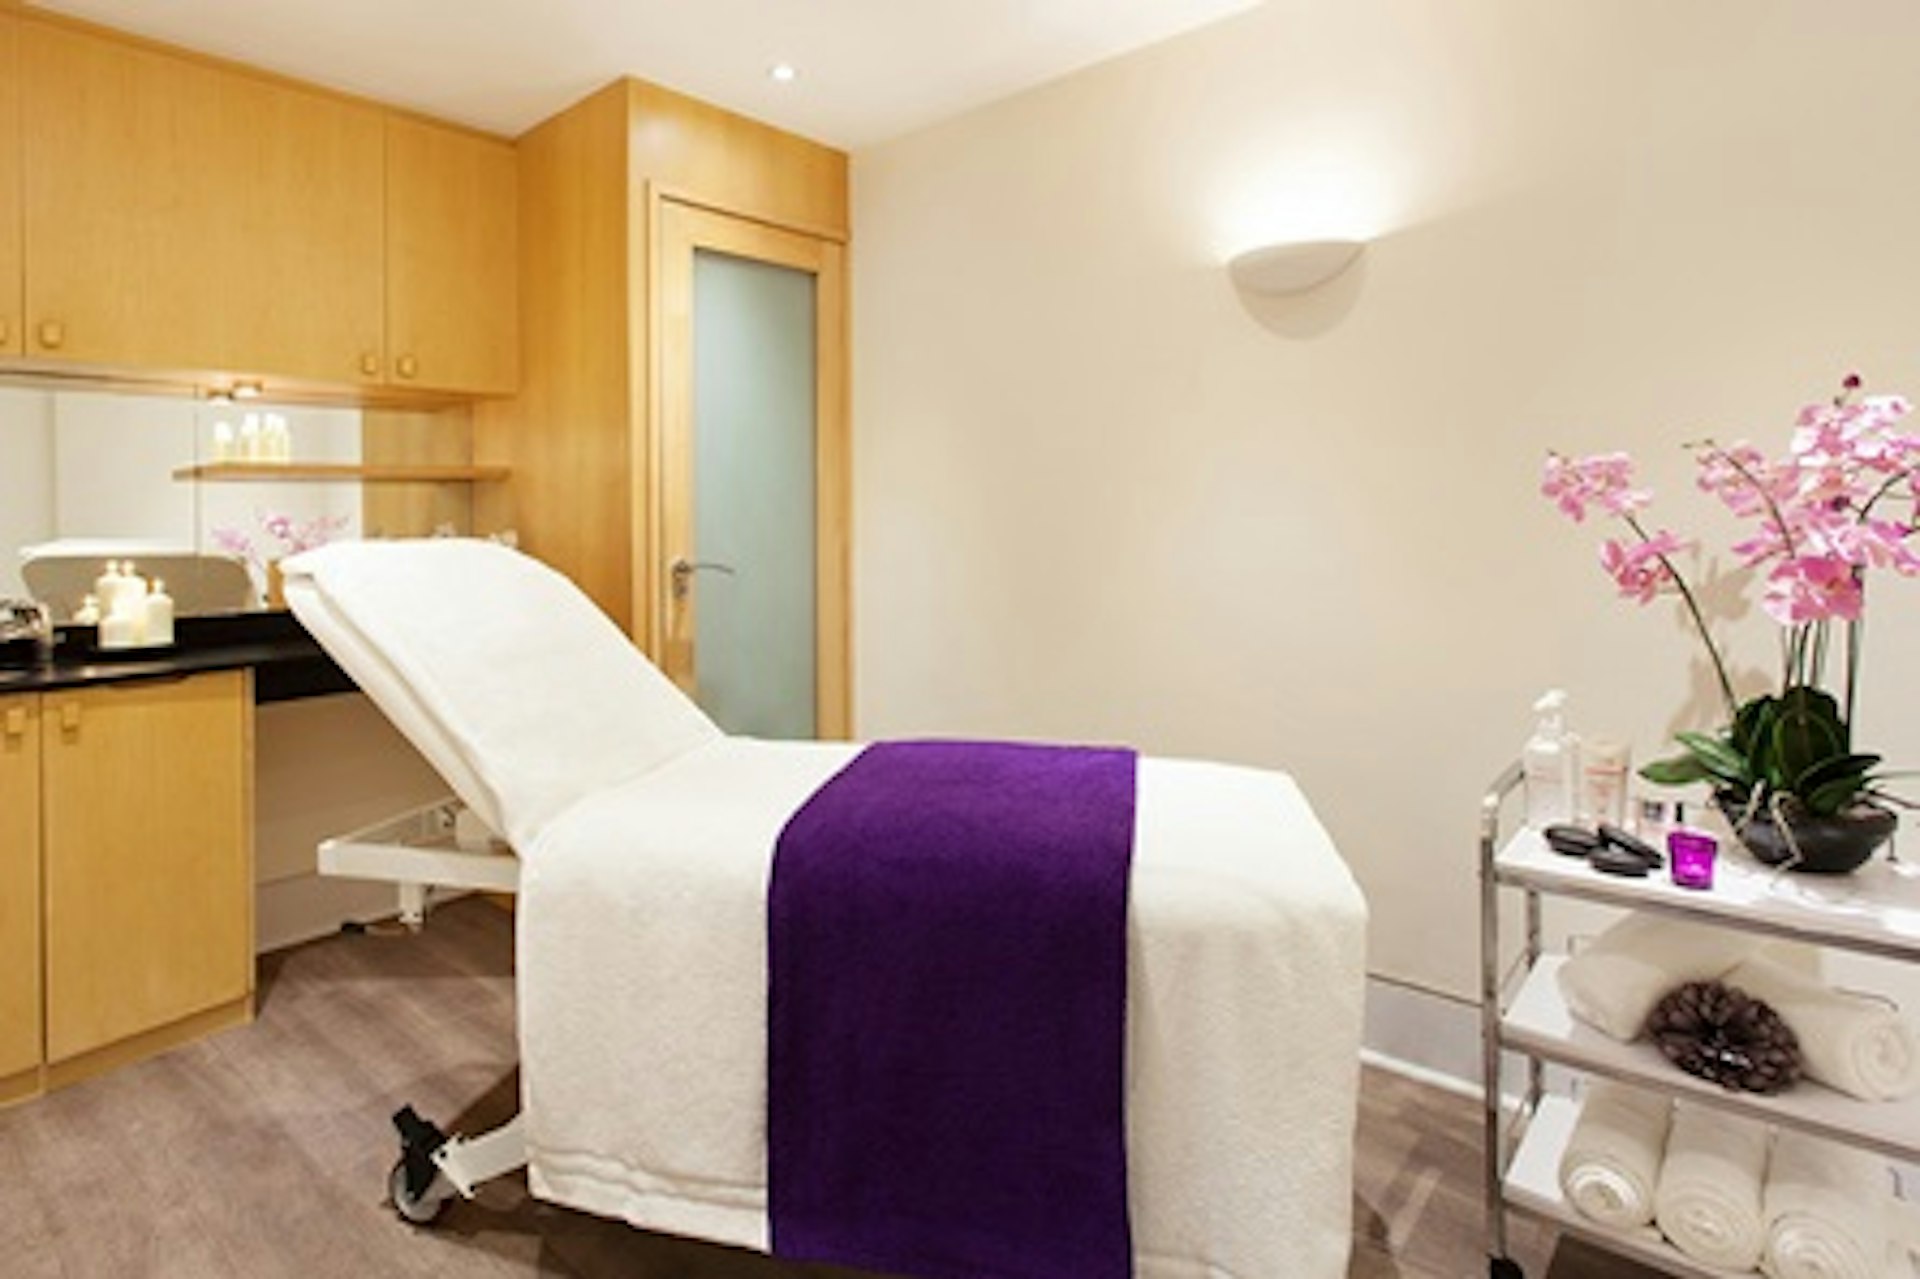 Relaxation Day with Treatment and Lunch for Two at the Crowne Plaza, Marlow 4